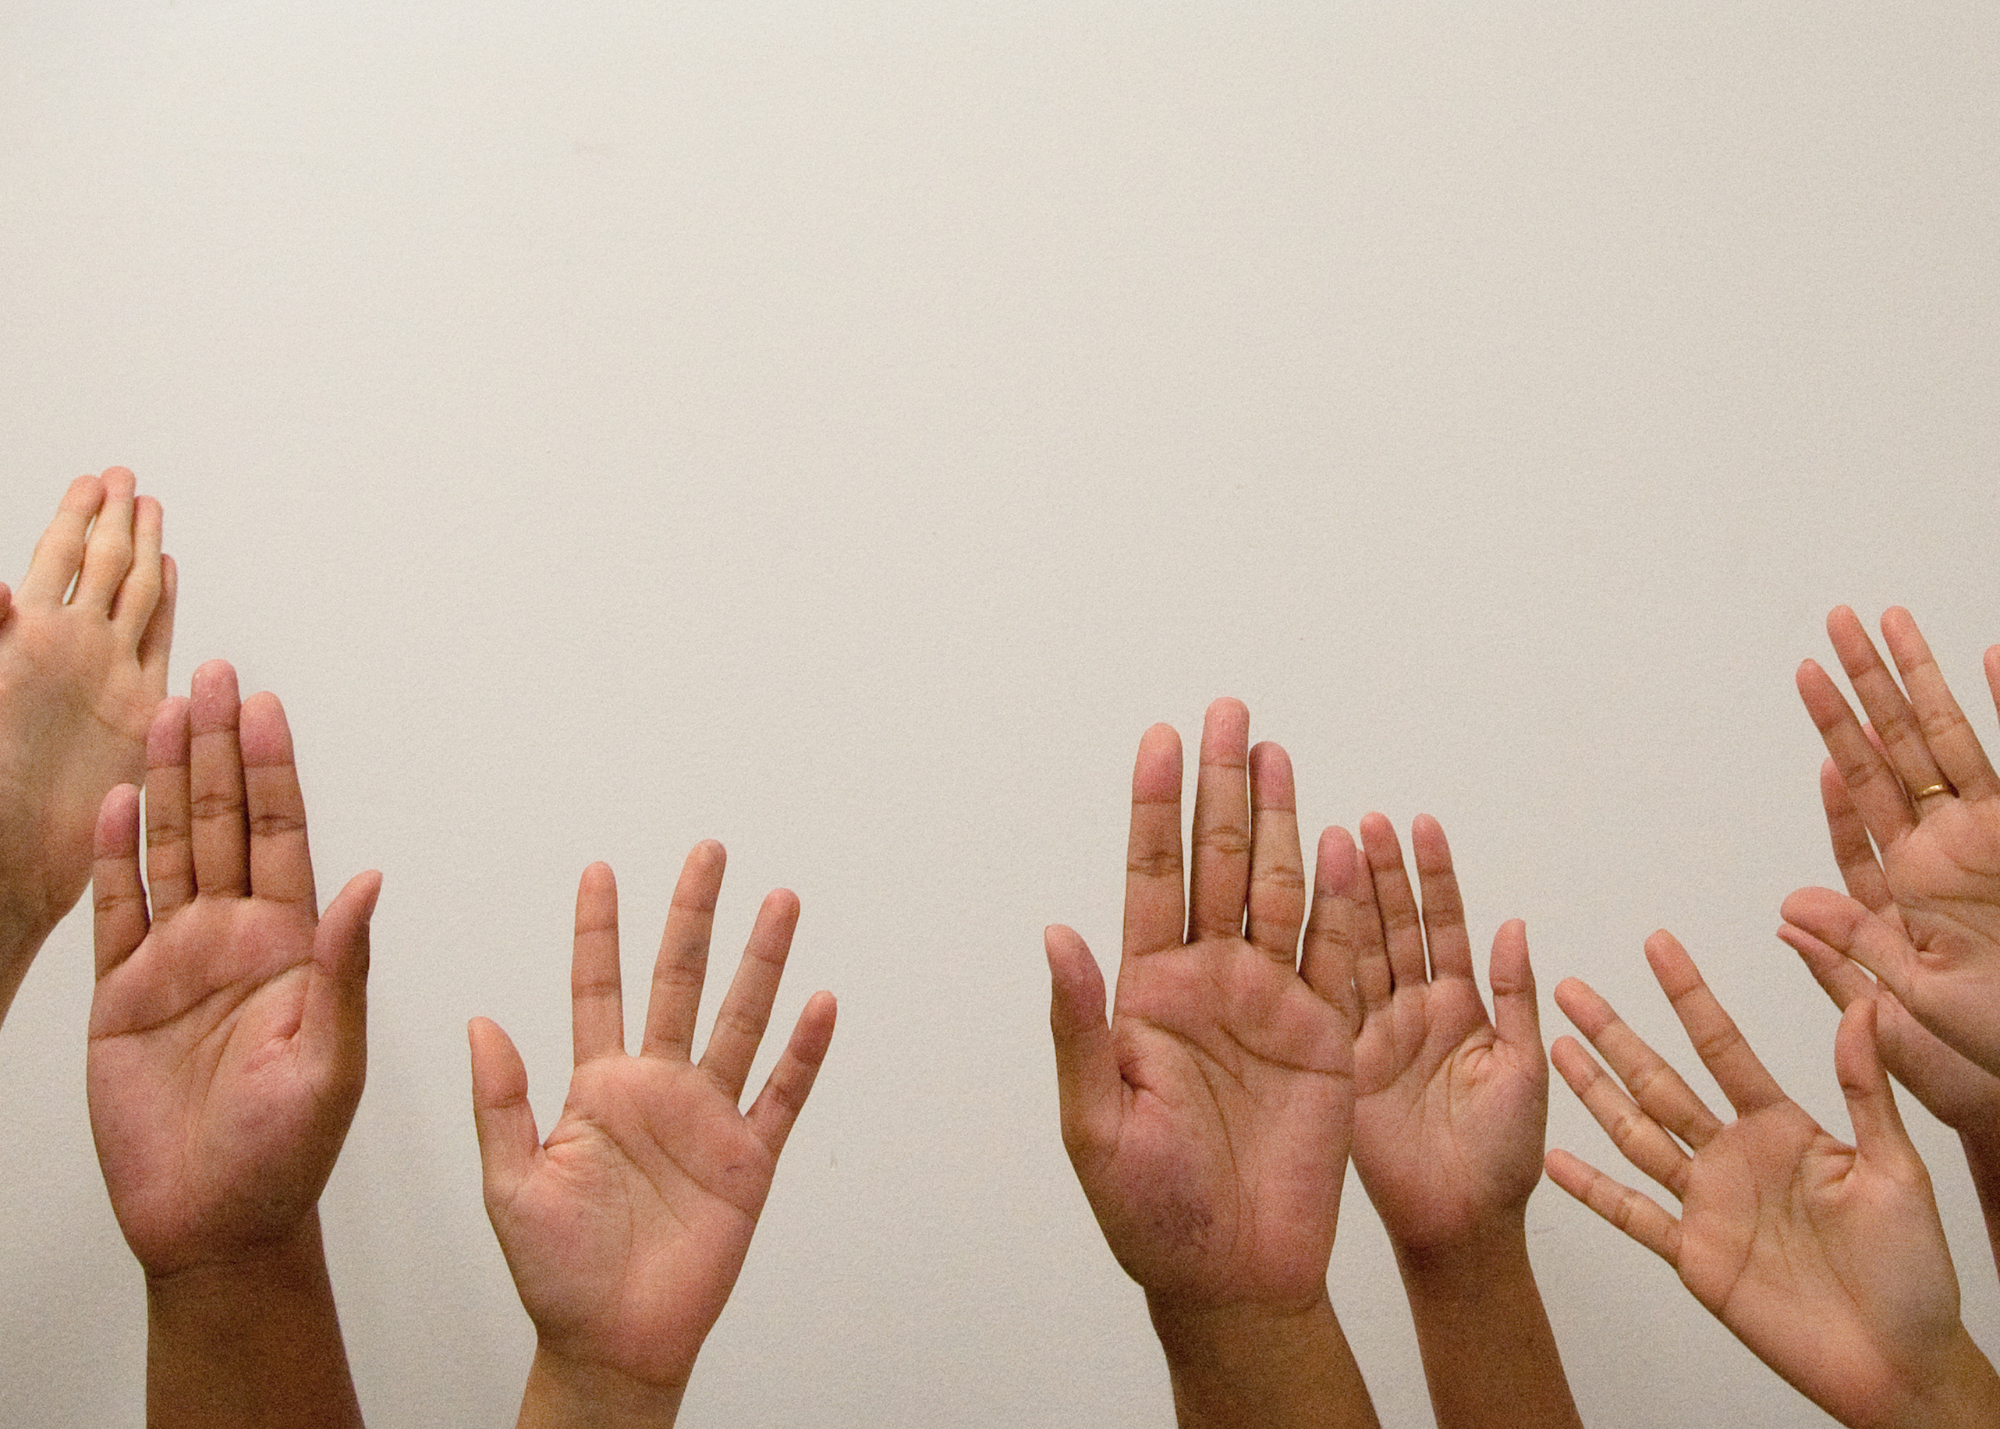 Hands raised in front of a white wall